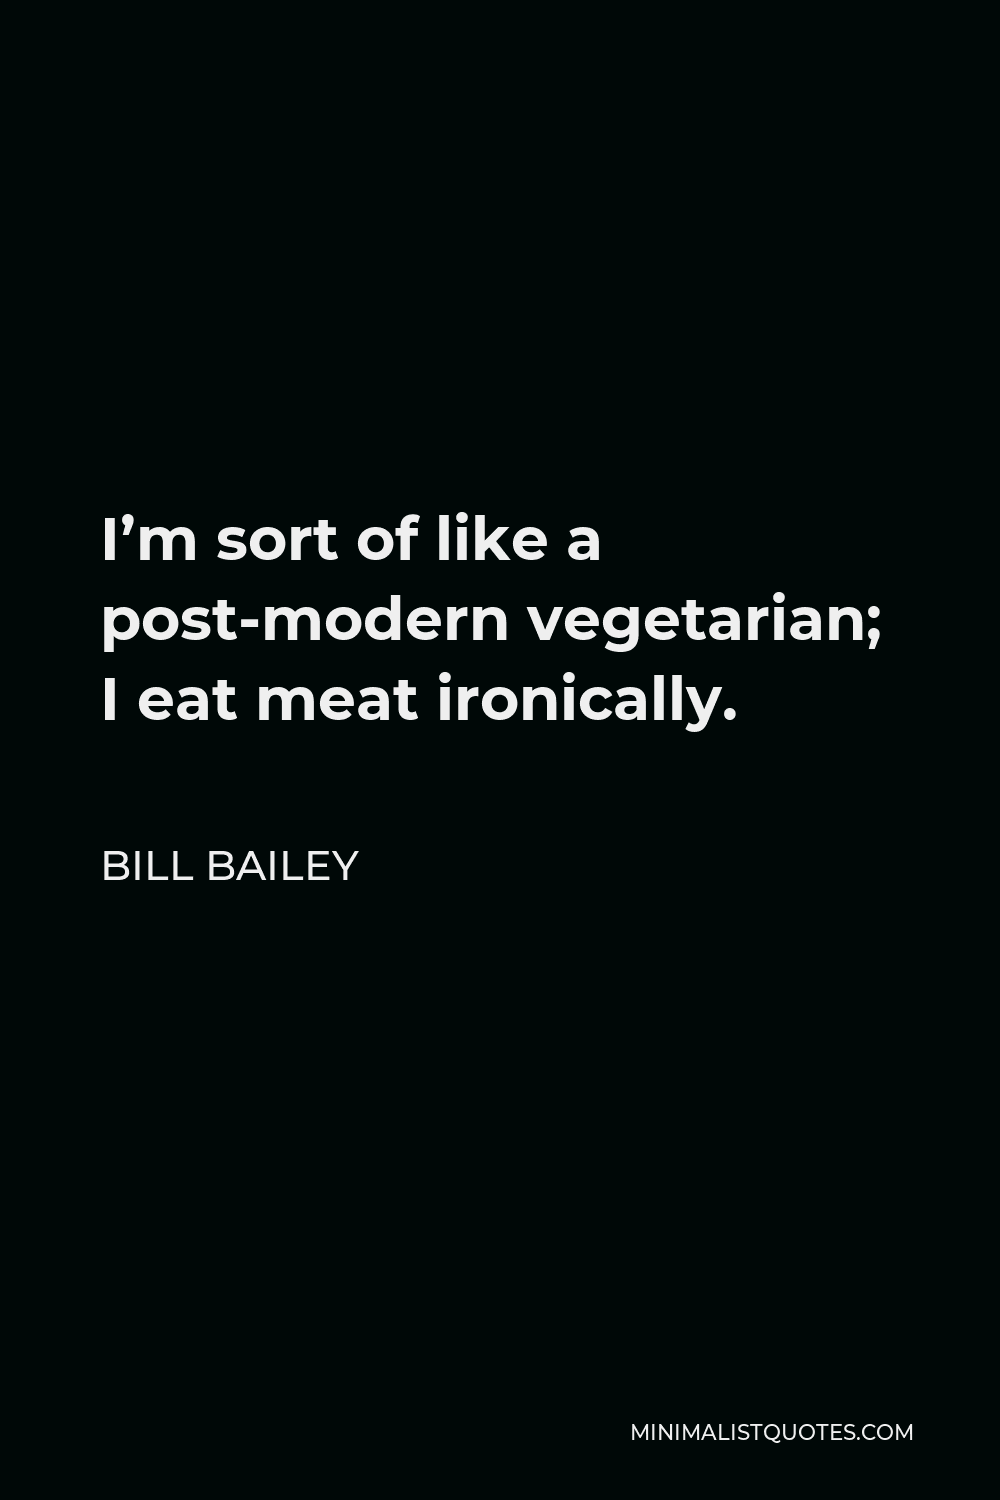 Bill Bailey Quote - I’m sort of like a post-modern vegetarian; I eat meat ironically.